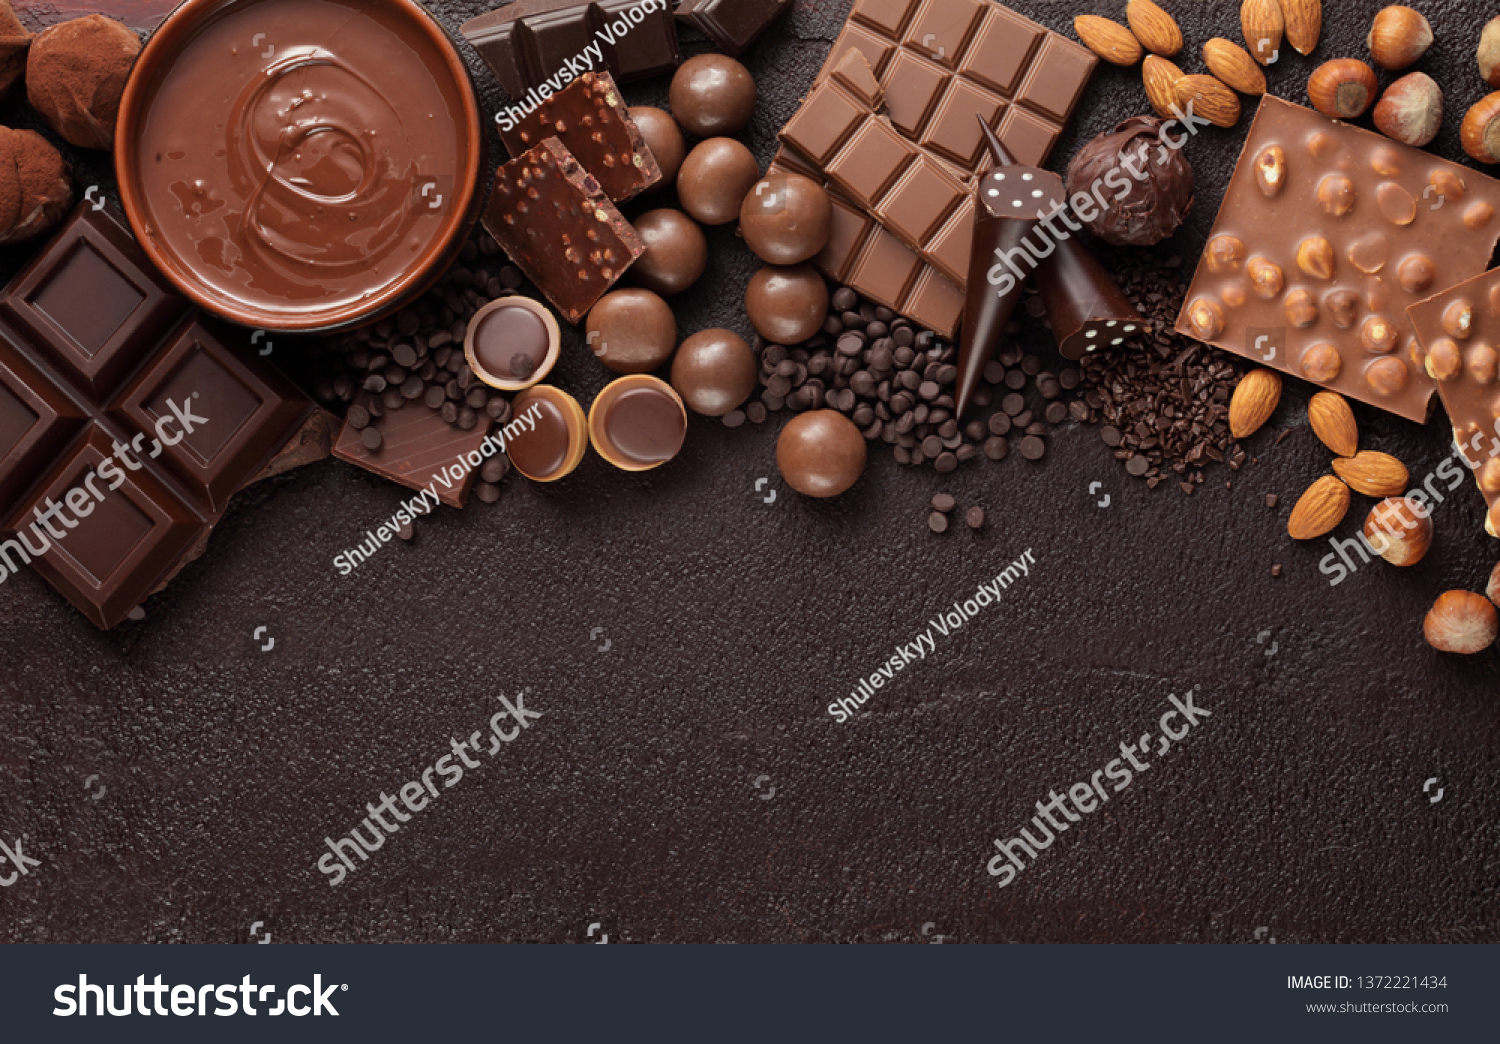 Chocolate candy box / Assortment of fine chocolates in white, dark, and milk chocolate and a bowl of melted chocolate #1372221434